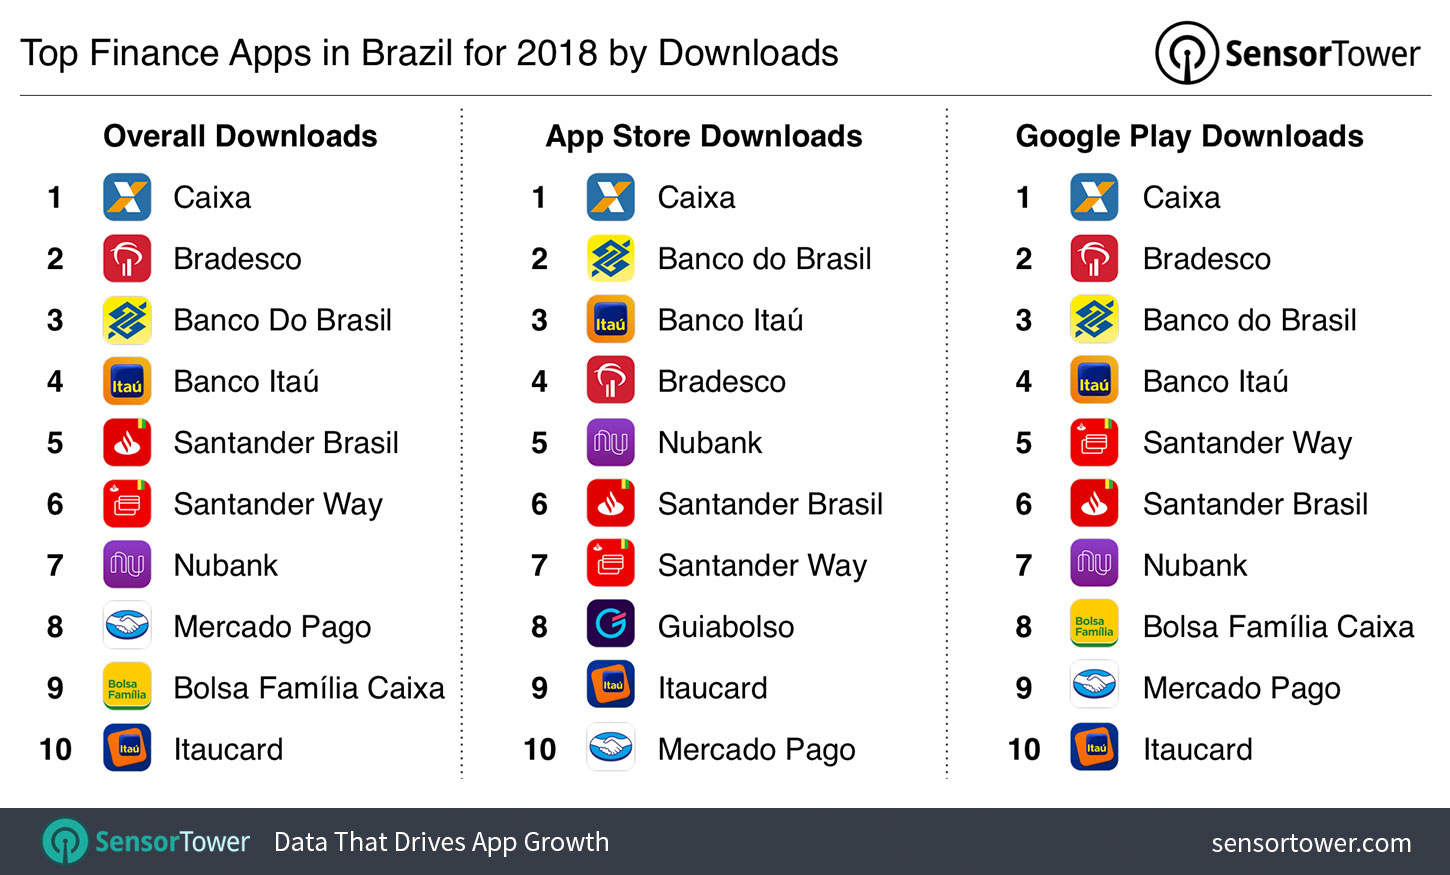 Top Finance Apps in Brazil for 2018 by Downloads